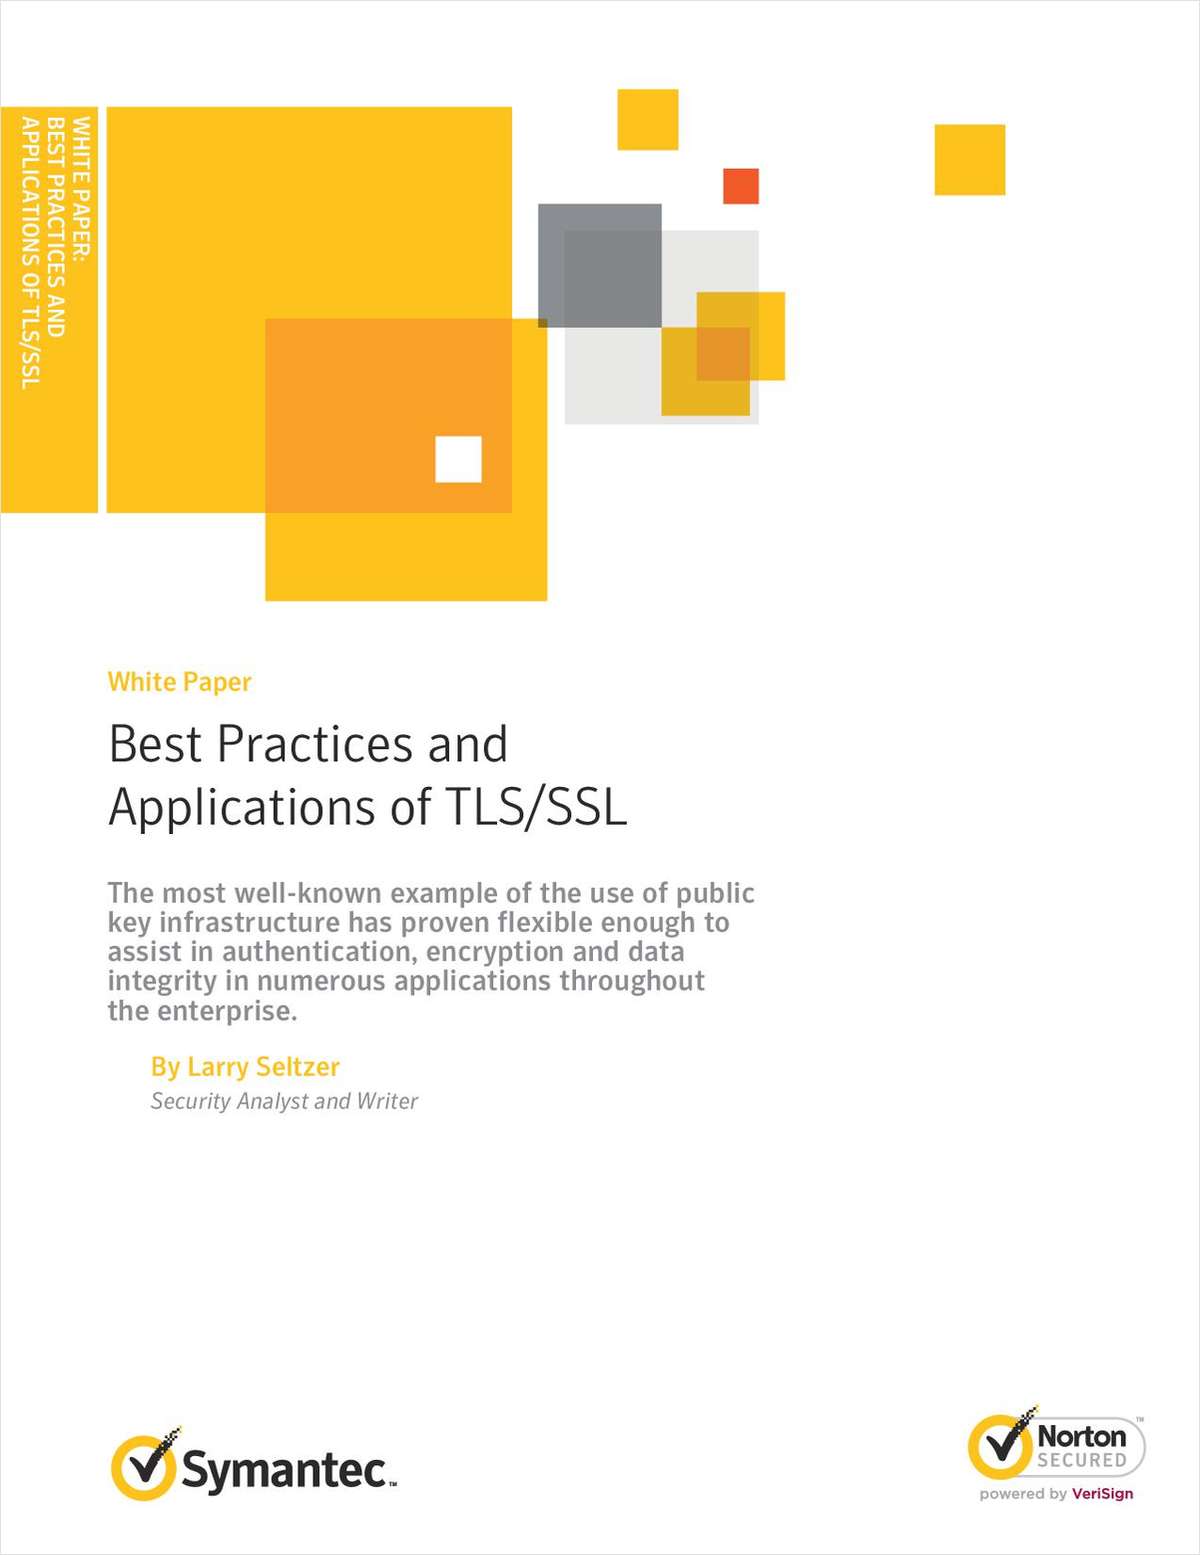 Best Practices and Applications of TLS/SSL